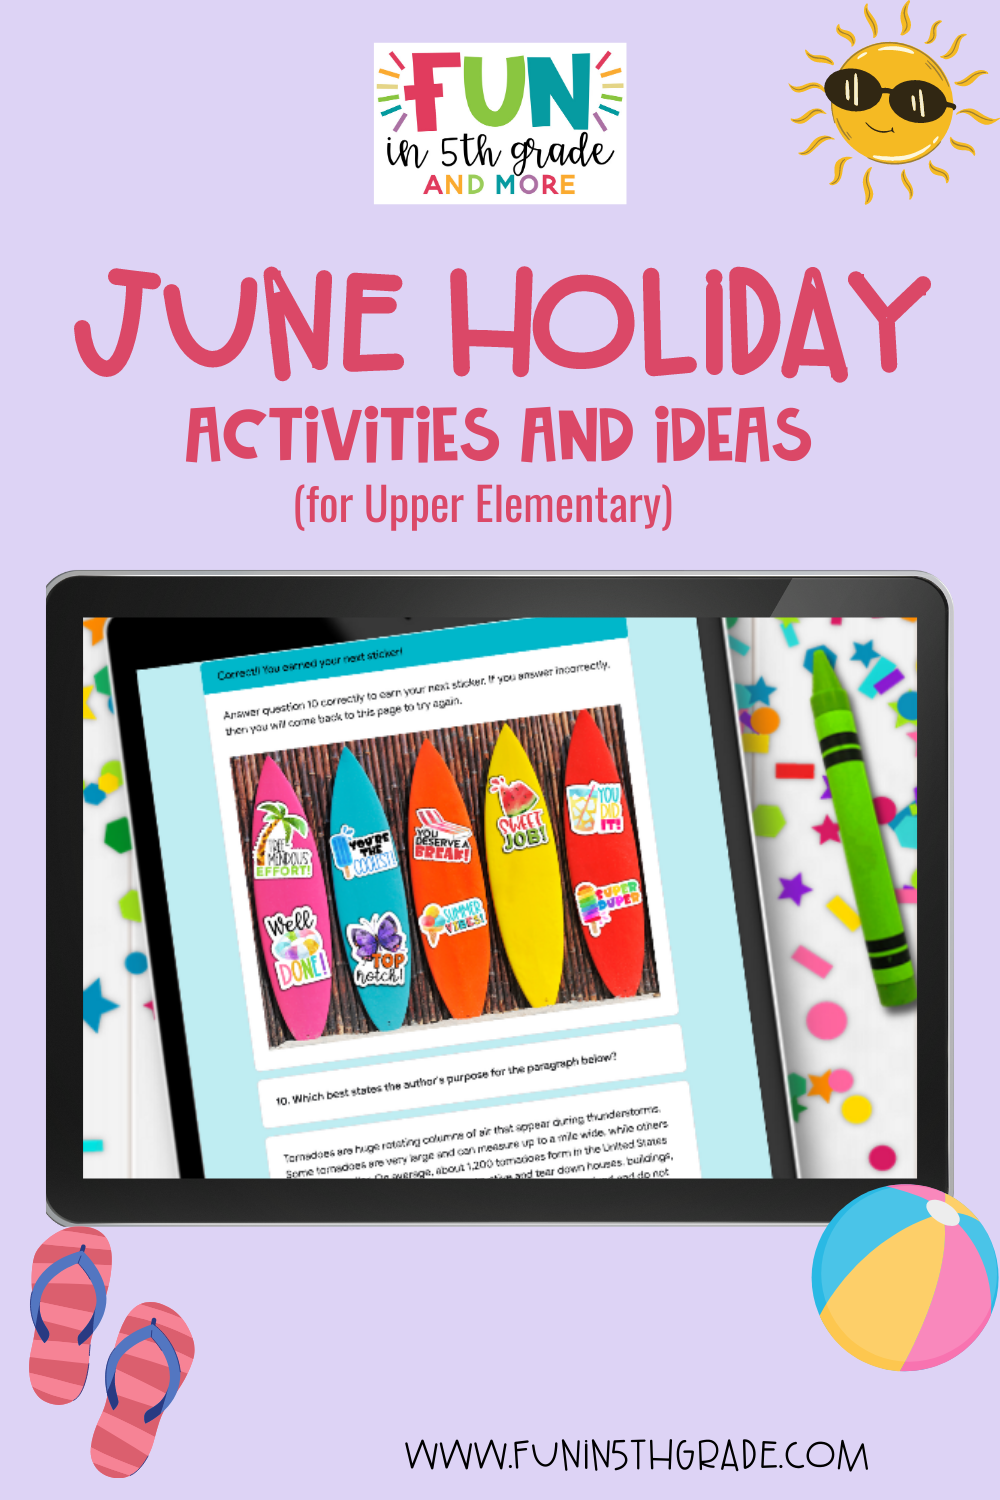 June Holiday Activities and Ideas (Pin)